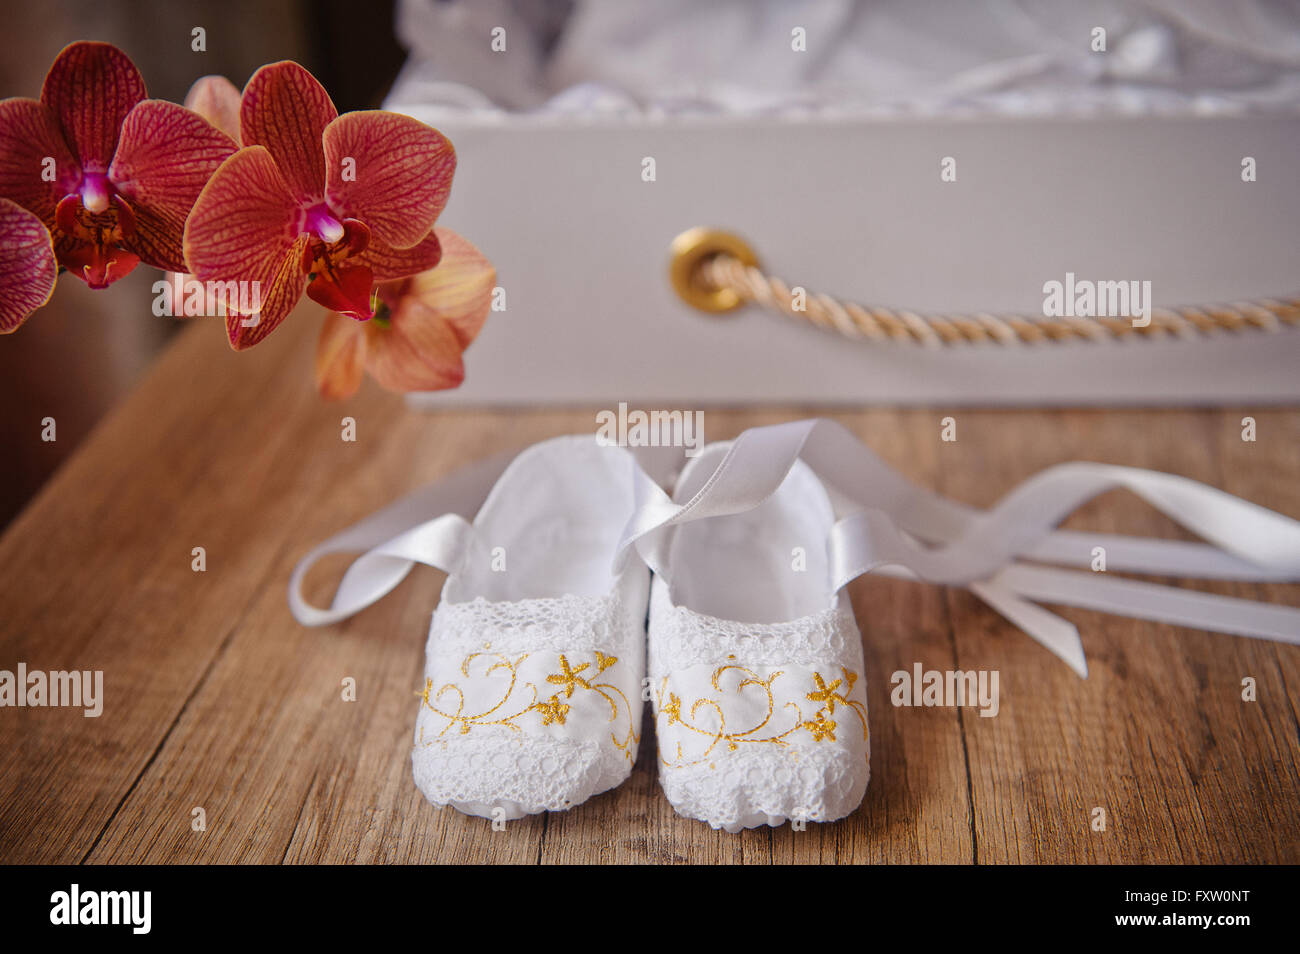 pair of Childrens ballet shoes worn and flowers Stock Photo